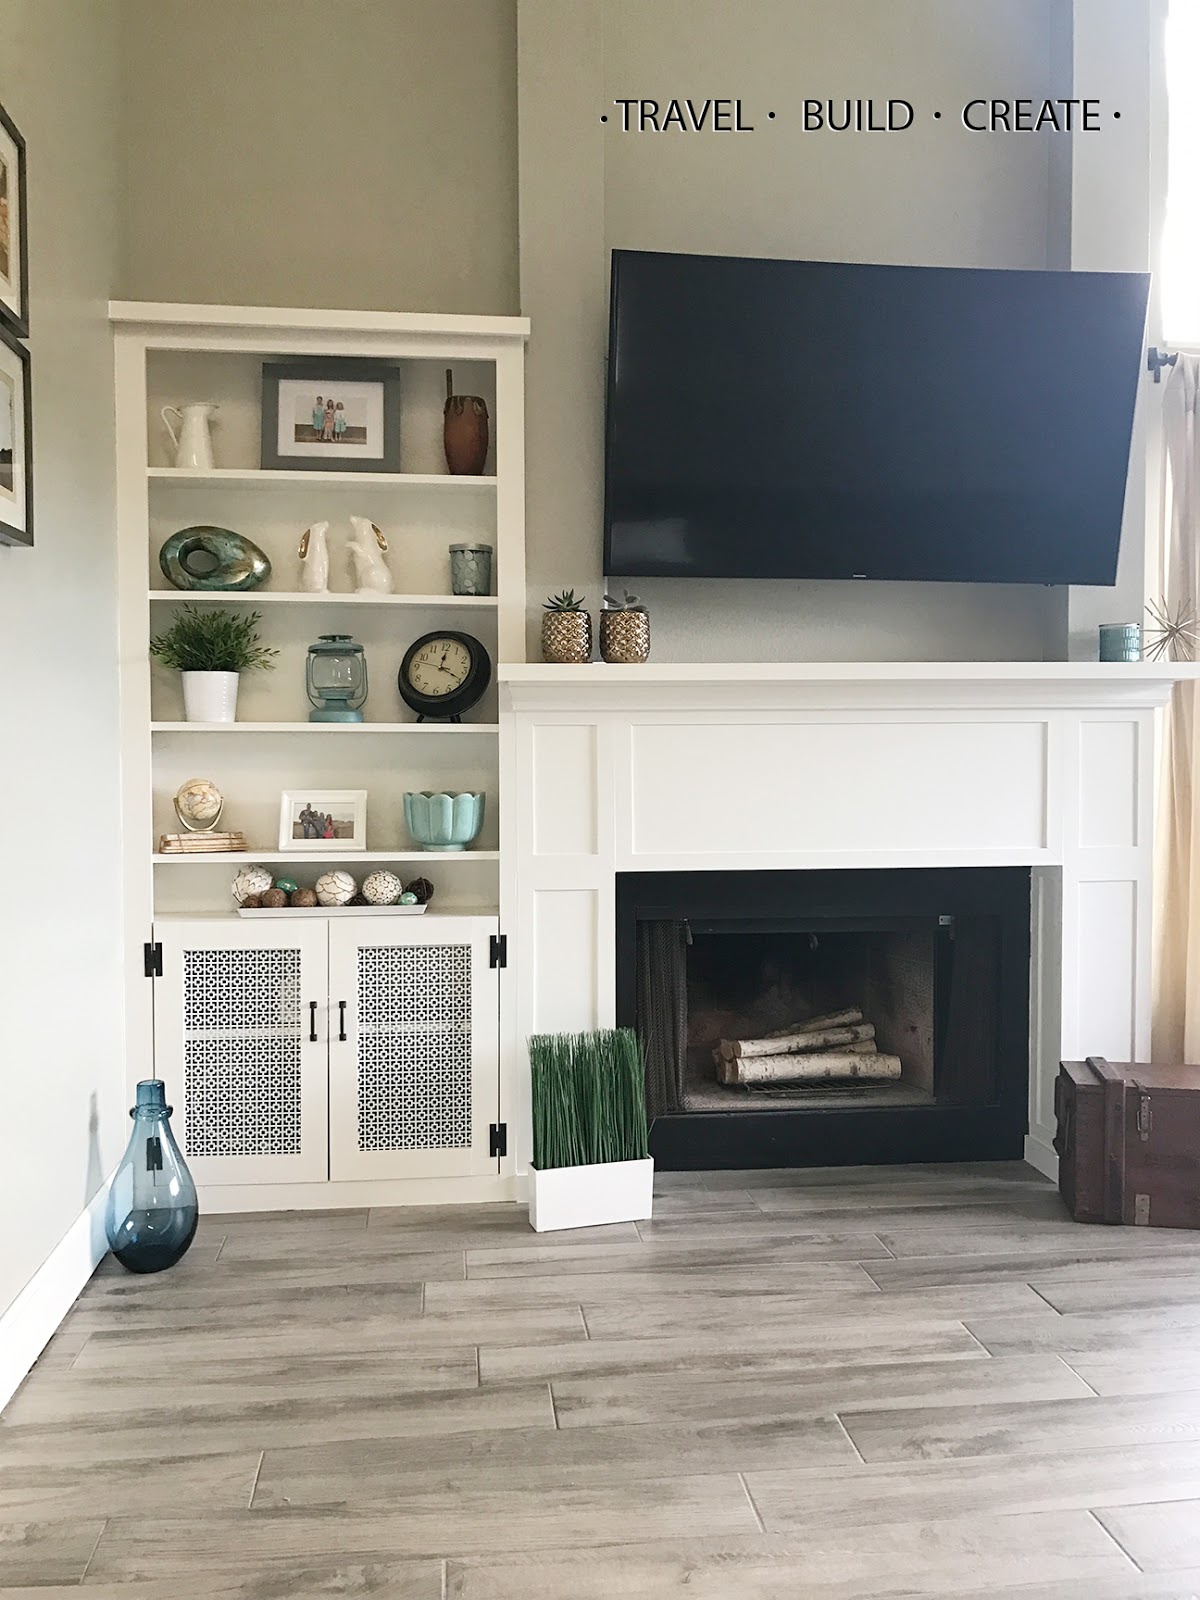 Diy Fireplace Surround And Built In, How To Build Built In Shelves Around Fireplace